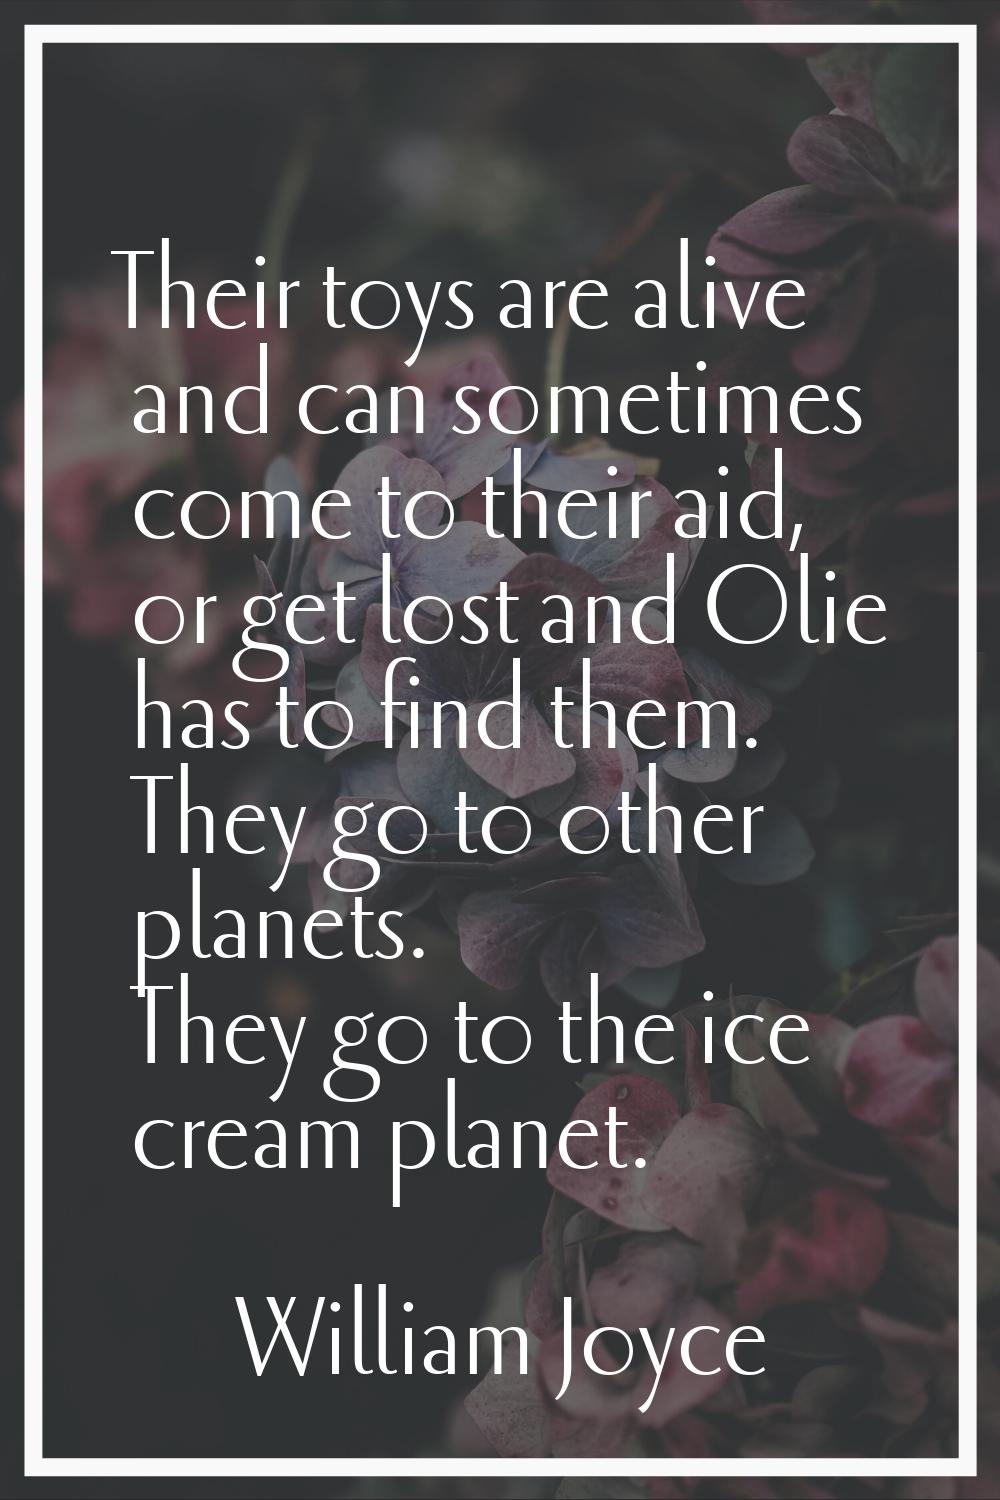 Their toys are alive and can sometimes come to their aid, or get lost and Olie has to find them. Th